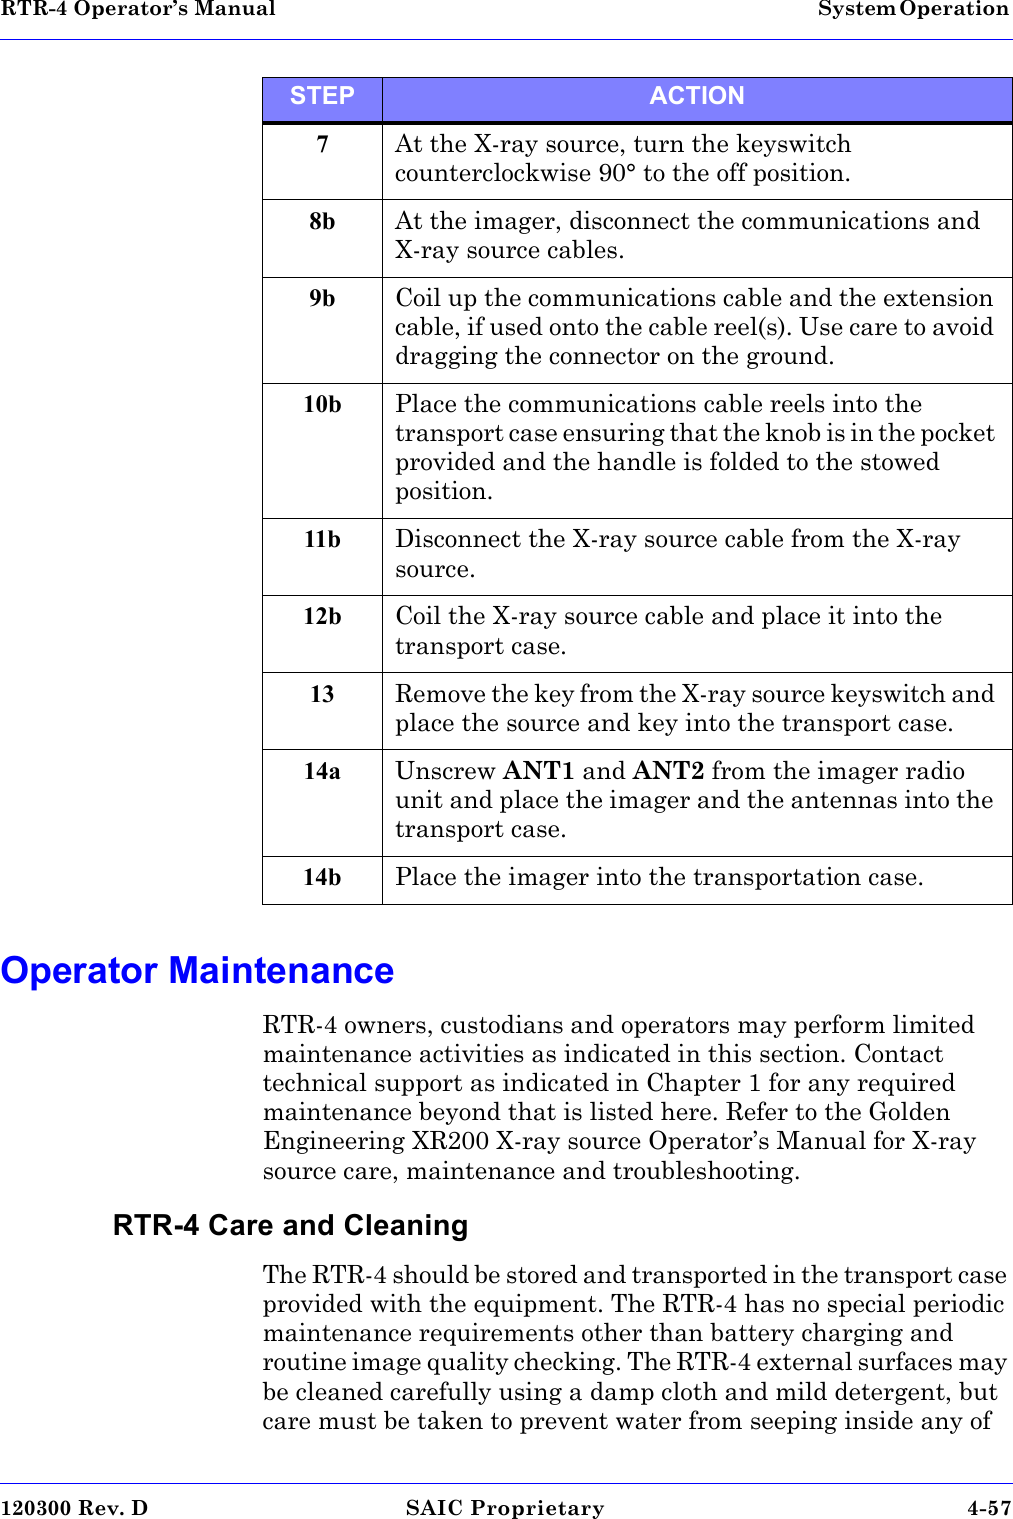 RTR-4 Operator’s Manual System Operation 120300 Rev. D SAIC Proprietary 4-57 Operator MaintenanceRTR-4 owners, custodians and operators may perform limited maintenance activities as indicated in this section. Contact technical support as indicated in Chapter 1 for any required maintenance beyond that is listed here. Refer to the Golden Engineering XR200 X-ray source Operator’s Manual for X-ray source care, maintenance and troubleshooting.RTR-4 Care and CleaningThe RTR-4 should be stored and transported in the transport case provided with the equipment. The RTR-4 has no special periodic maintenance requirements other than battery charging and routine image quality checking. The RTR-4 external surfaces may be cleaned carefully using a damp cloth and mild detergent, but care must be taken to prevent water from seeping inside any of 7At the X-ray source, turn the keyswitch counterclockwise 90° to the off position. 8b At the imager, disconnect the communications and X-ray source cables.9b Coil up the communications cable and the extension cable, if used onto the cable reel(s). Use care to avoid dragging the connector on the ground.10b Place the communications cable reels into the transport case ensuring that the knob is in the pocket provided and the handle is folded to the stowed position.11b Disconnect the X-ray source cable from the X-ray source. 12b Coil the X-ray source cable and place it into the transport case. 13 Remove the key from the X-ray source keyswitch and place the source and key into the transport case.14a Unscrew ANT1 and ANT2 from the imager radio unit and place the imager and the antennas into the transport case.14b Place the imager into the transportation case.STEP ACTION